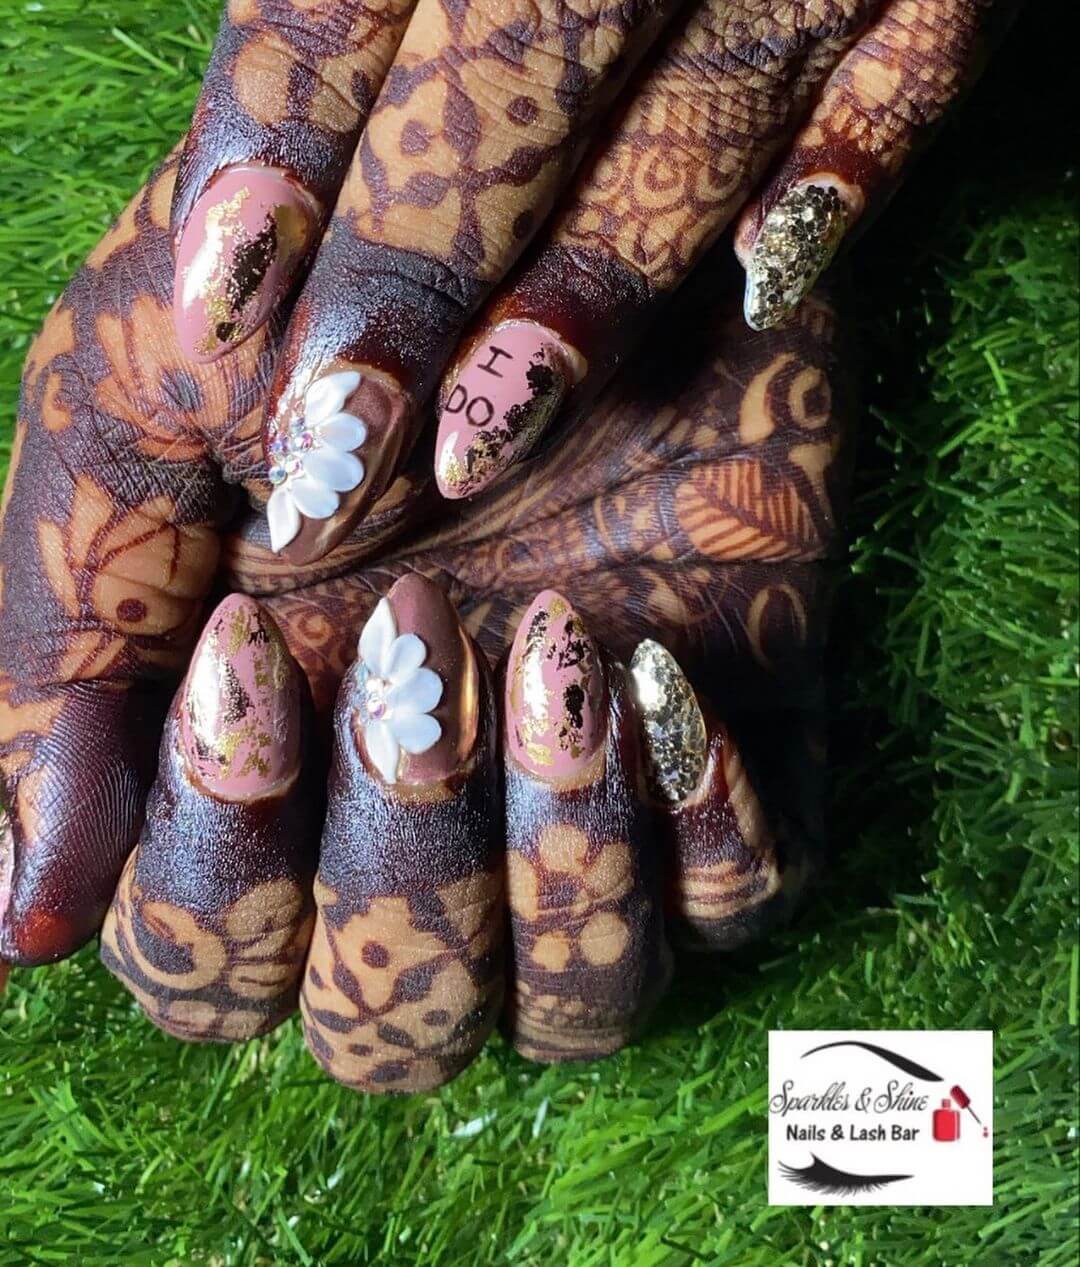 Indian Wedding Nail Art Designs Flowers And Pearls